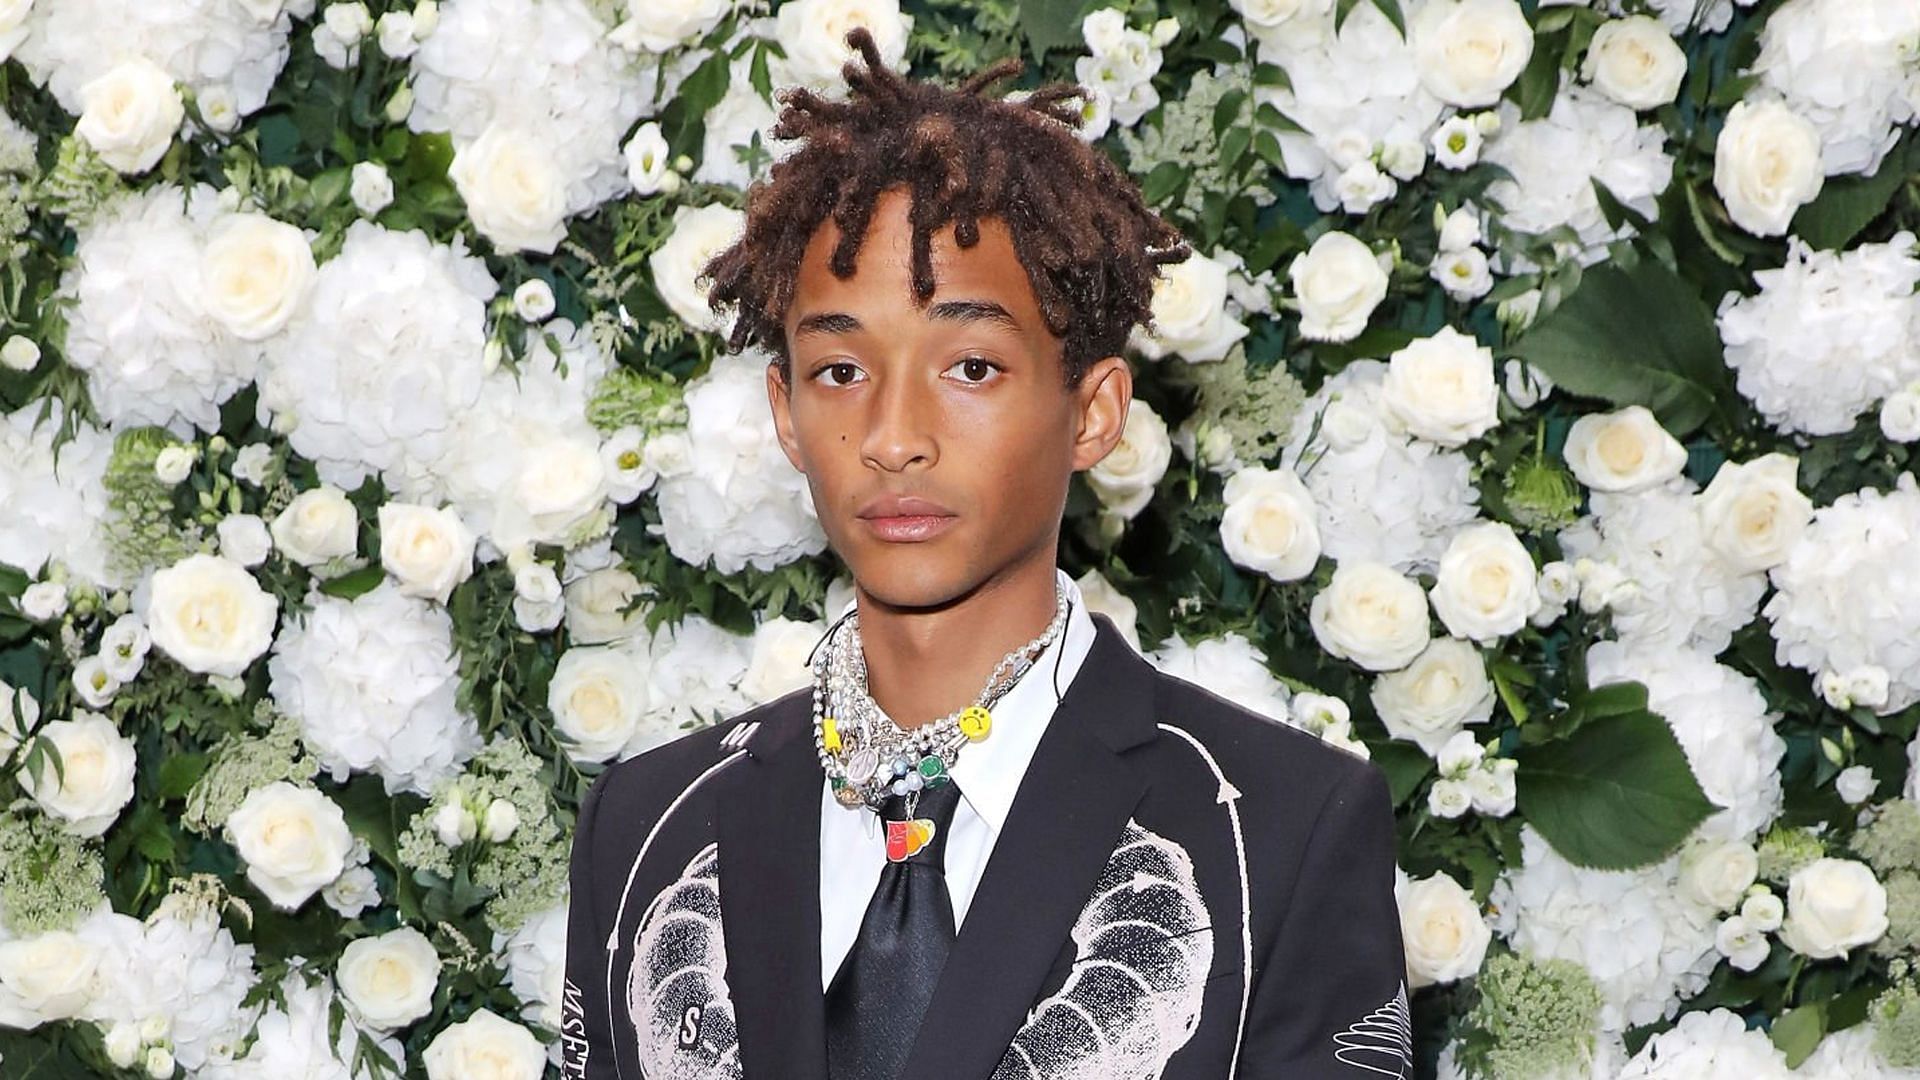 JadenSmith posted this video of himself crying.😢💔 What y'all think he's  crying about?🤔 Prayers up for Jaden🙏🏽 @HipHopTiesMedia